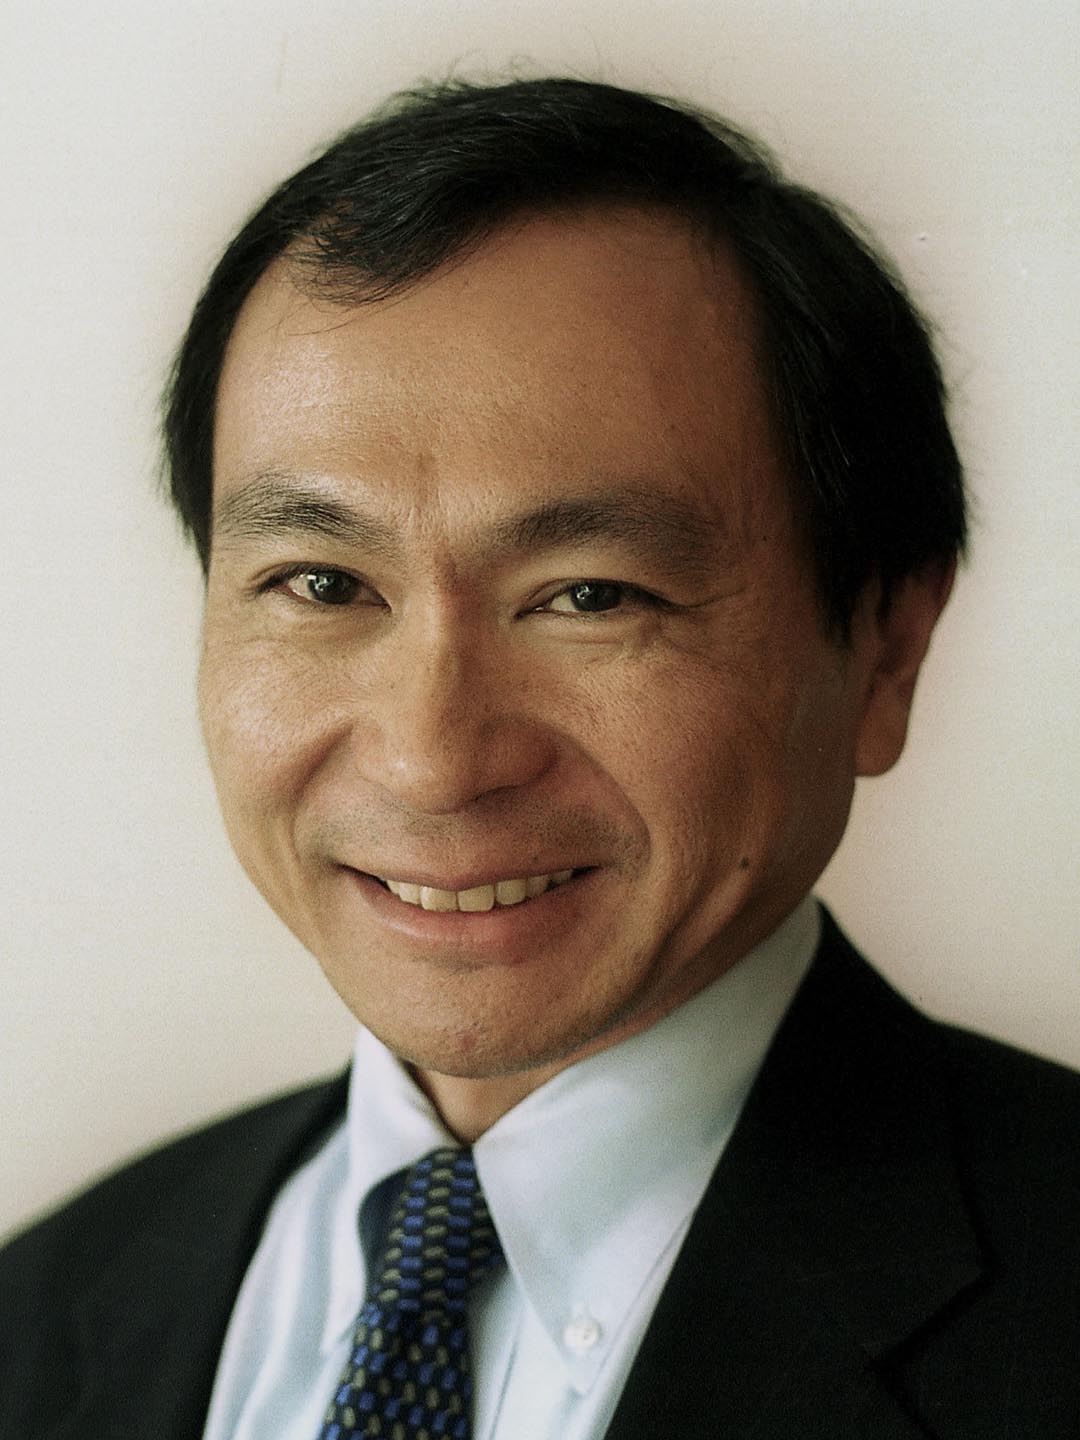 identity-belonging-dignity-lessons-from-francis-fukuyama-for-sri